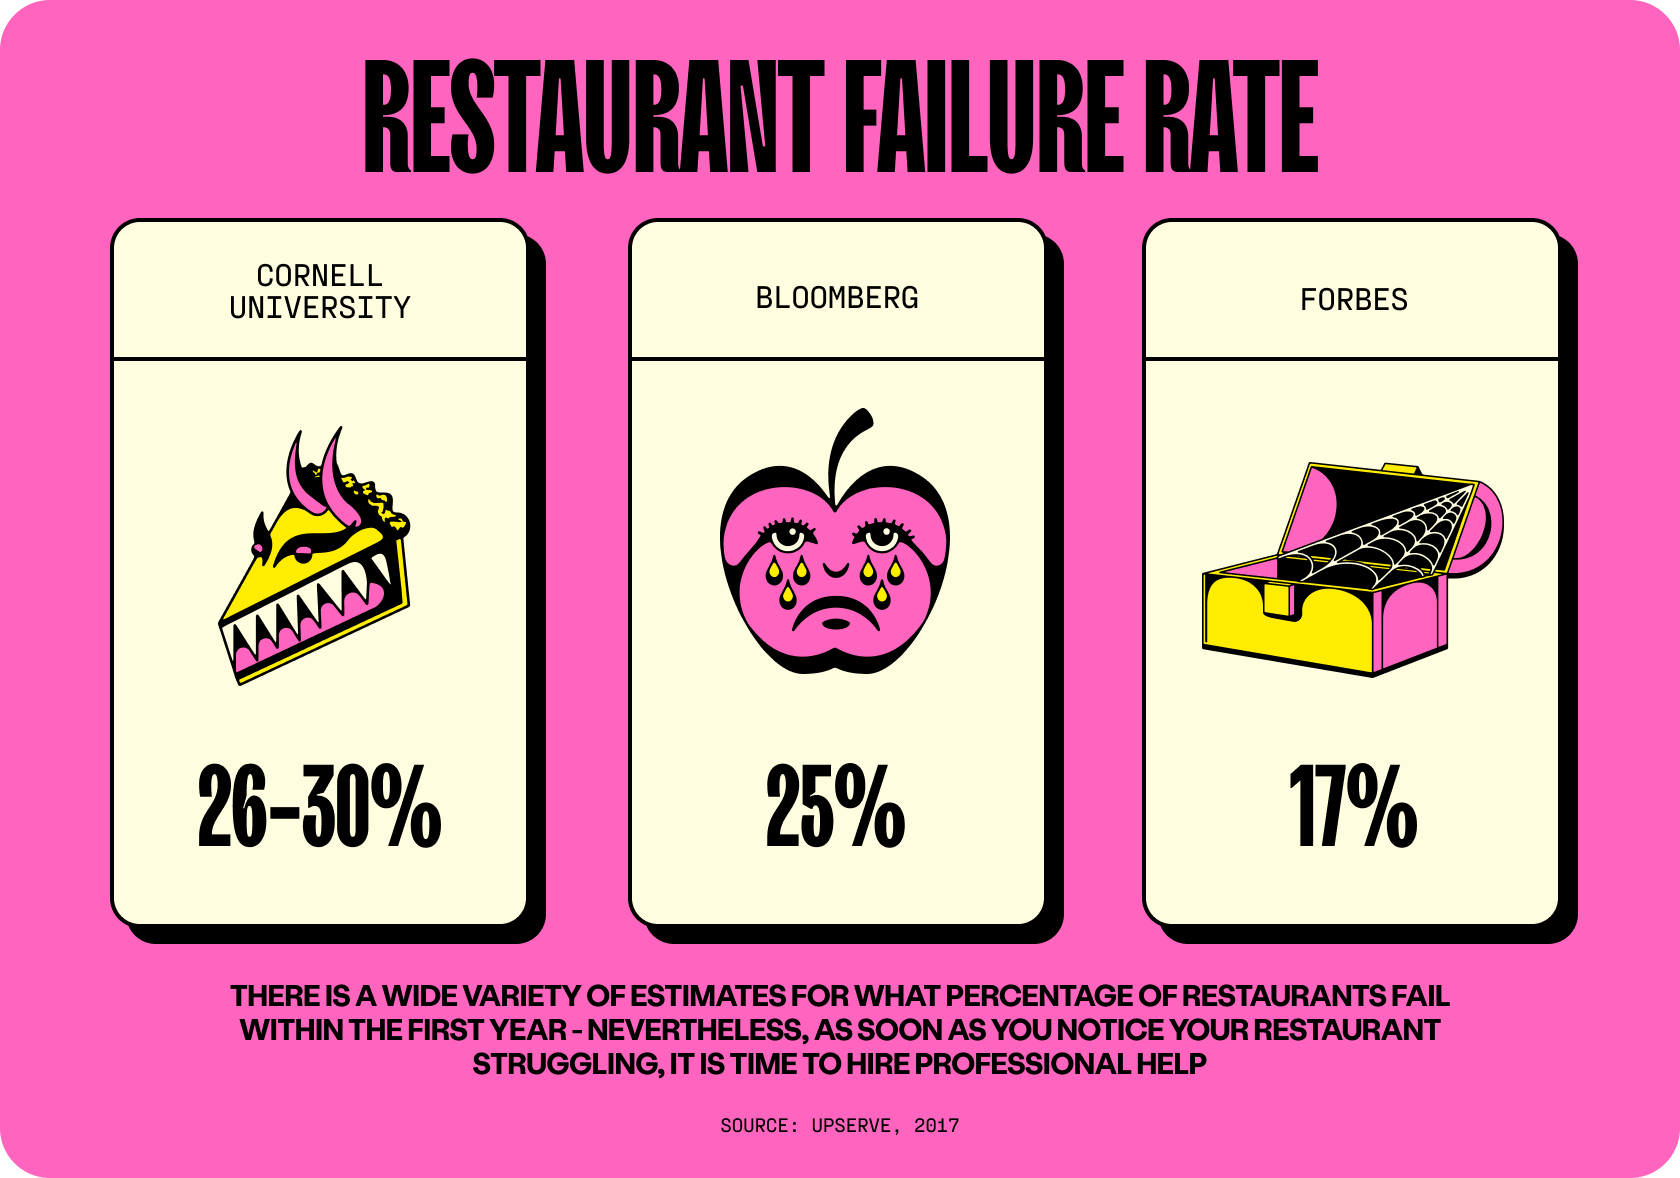 There is a wide variety of estimates for what percentage of restaurants fail within the first year - nevertheless, as soon as you notice your restaurant struggling, it is time to hire professional help. Source: Upserve, 2017